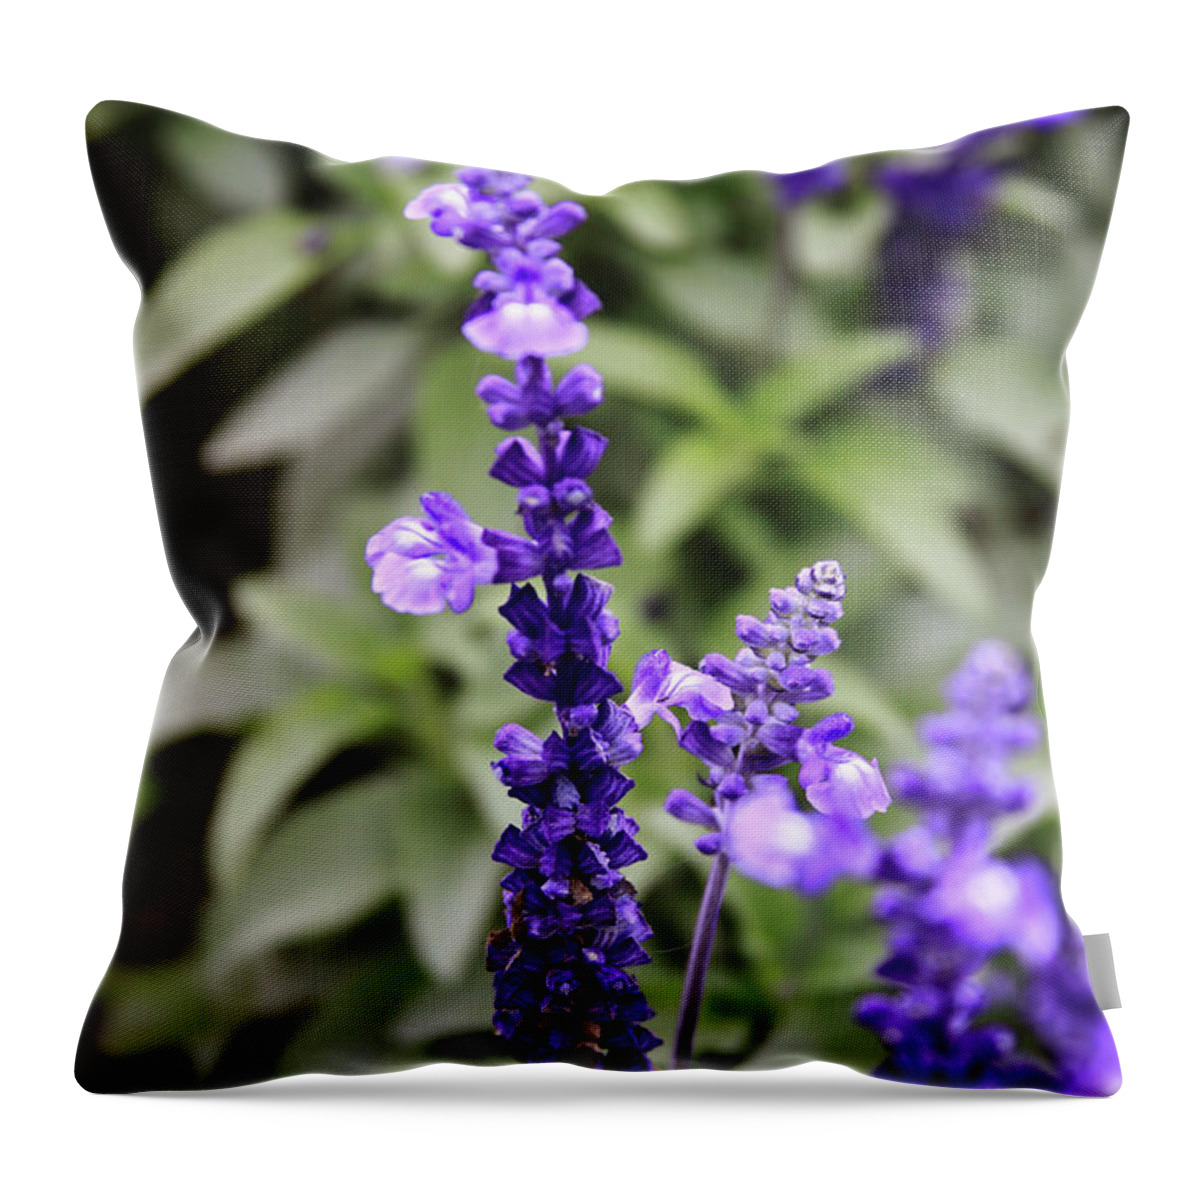 China Throw Pillow featuring the photograph Sage Flowers by Tanya Owens